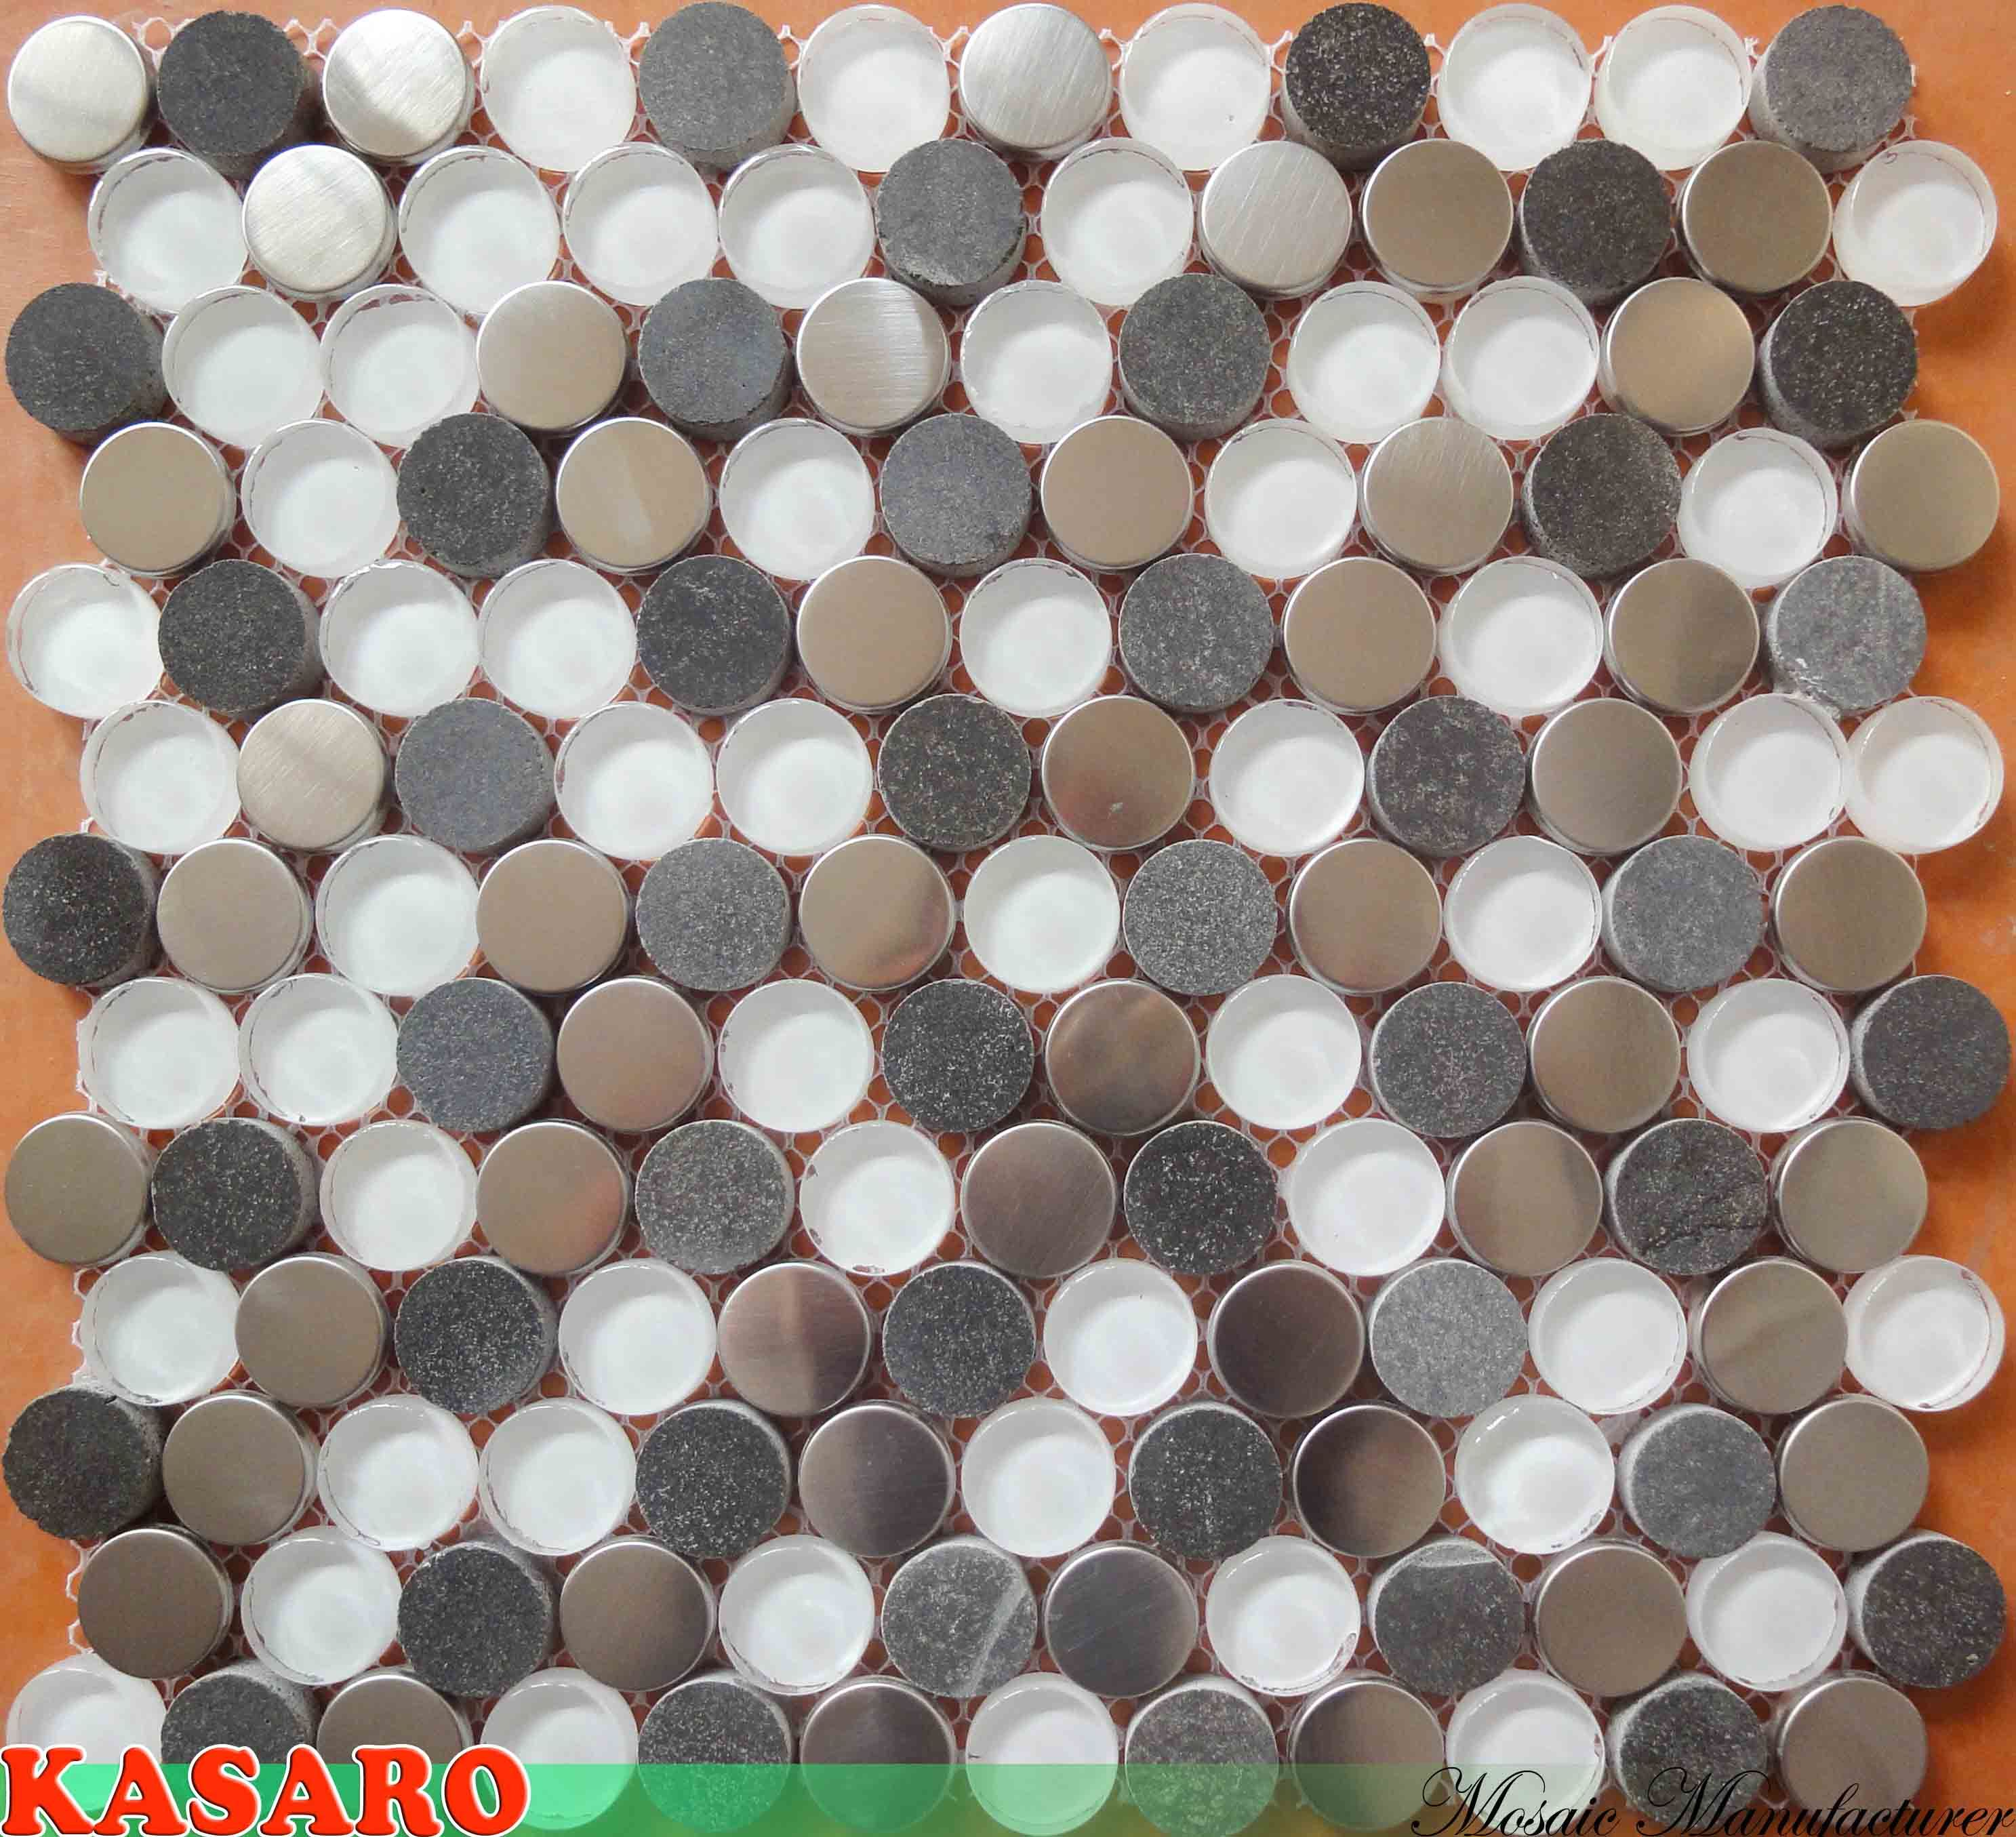 Glass Stone and Stainless Steel Mosaic Wall Decoration (KSL7735)